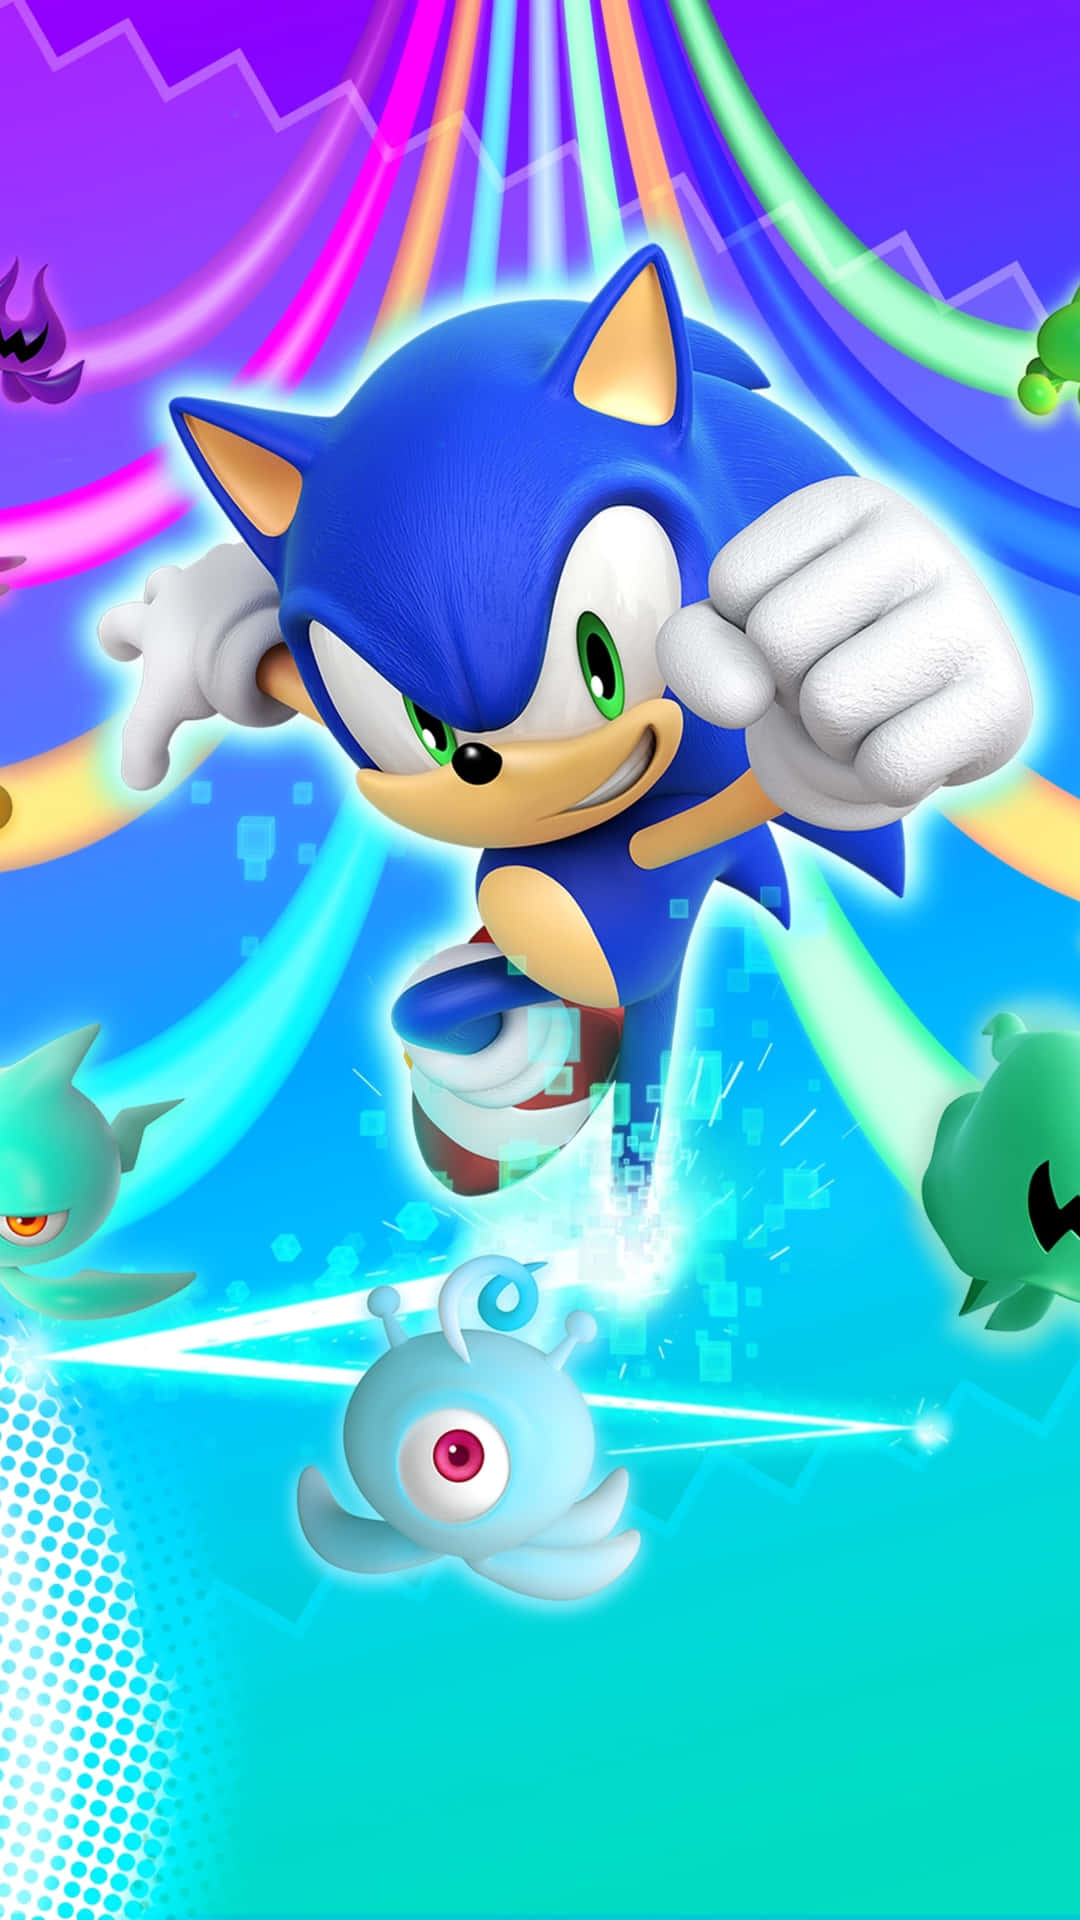 Classic Sonic Wallpaper by ActionDash on DeviantArt